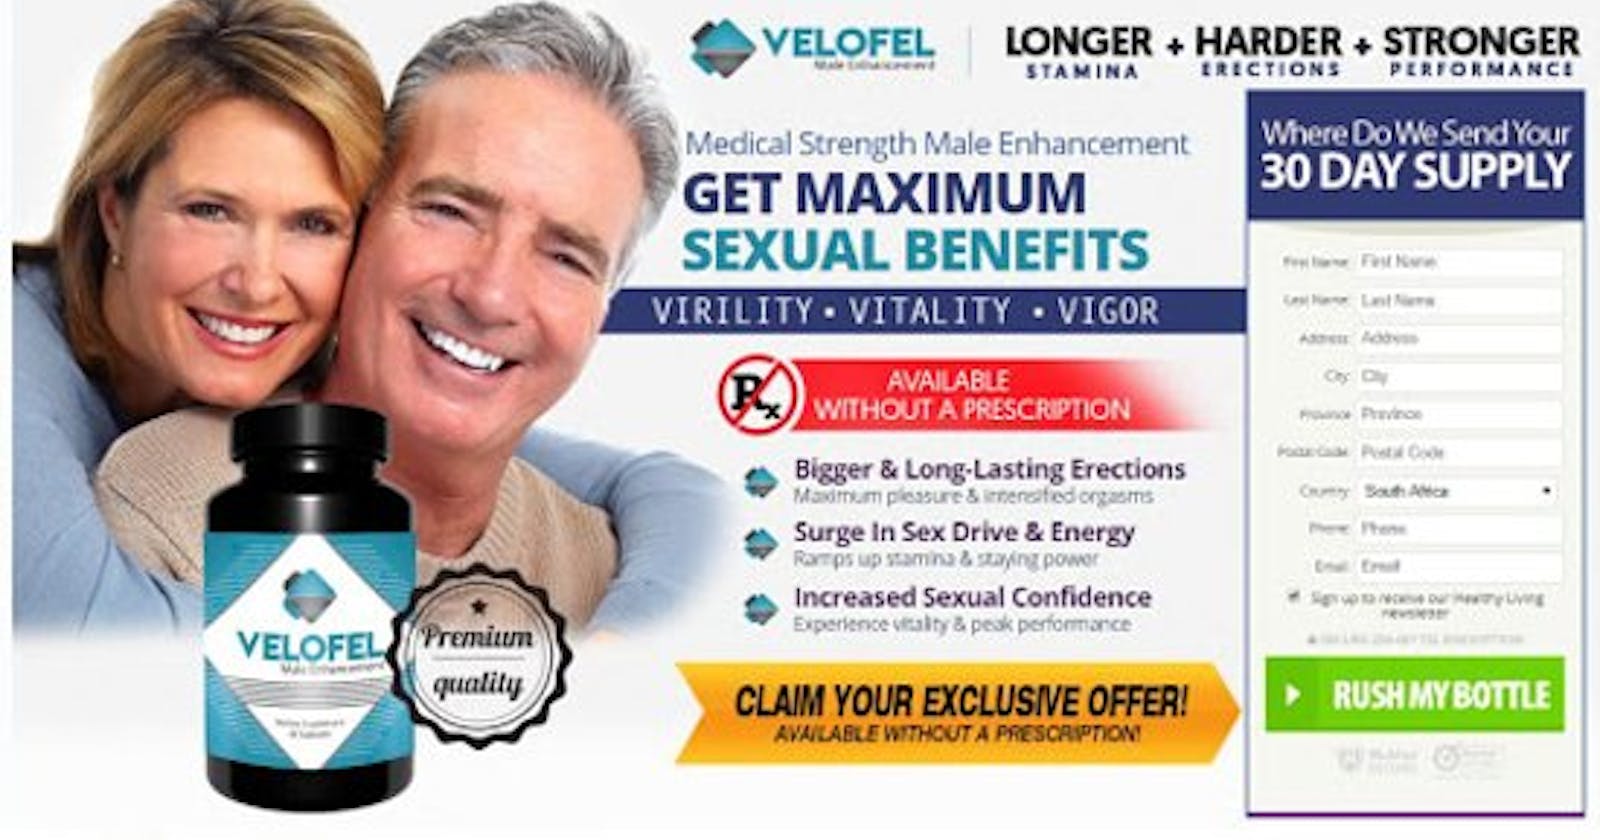 Velofel Male Enhancement “USA” It is Trusted or Fake?